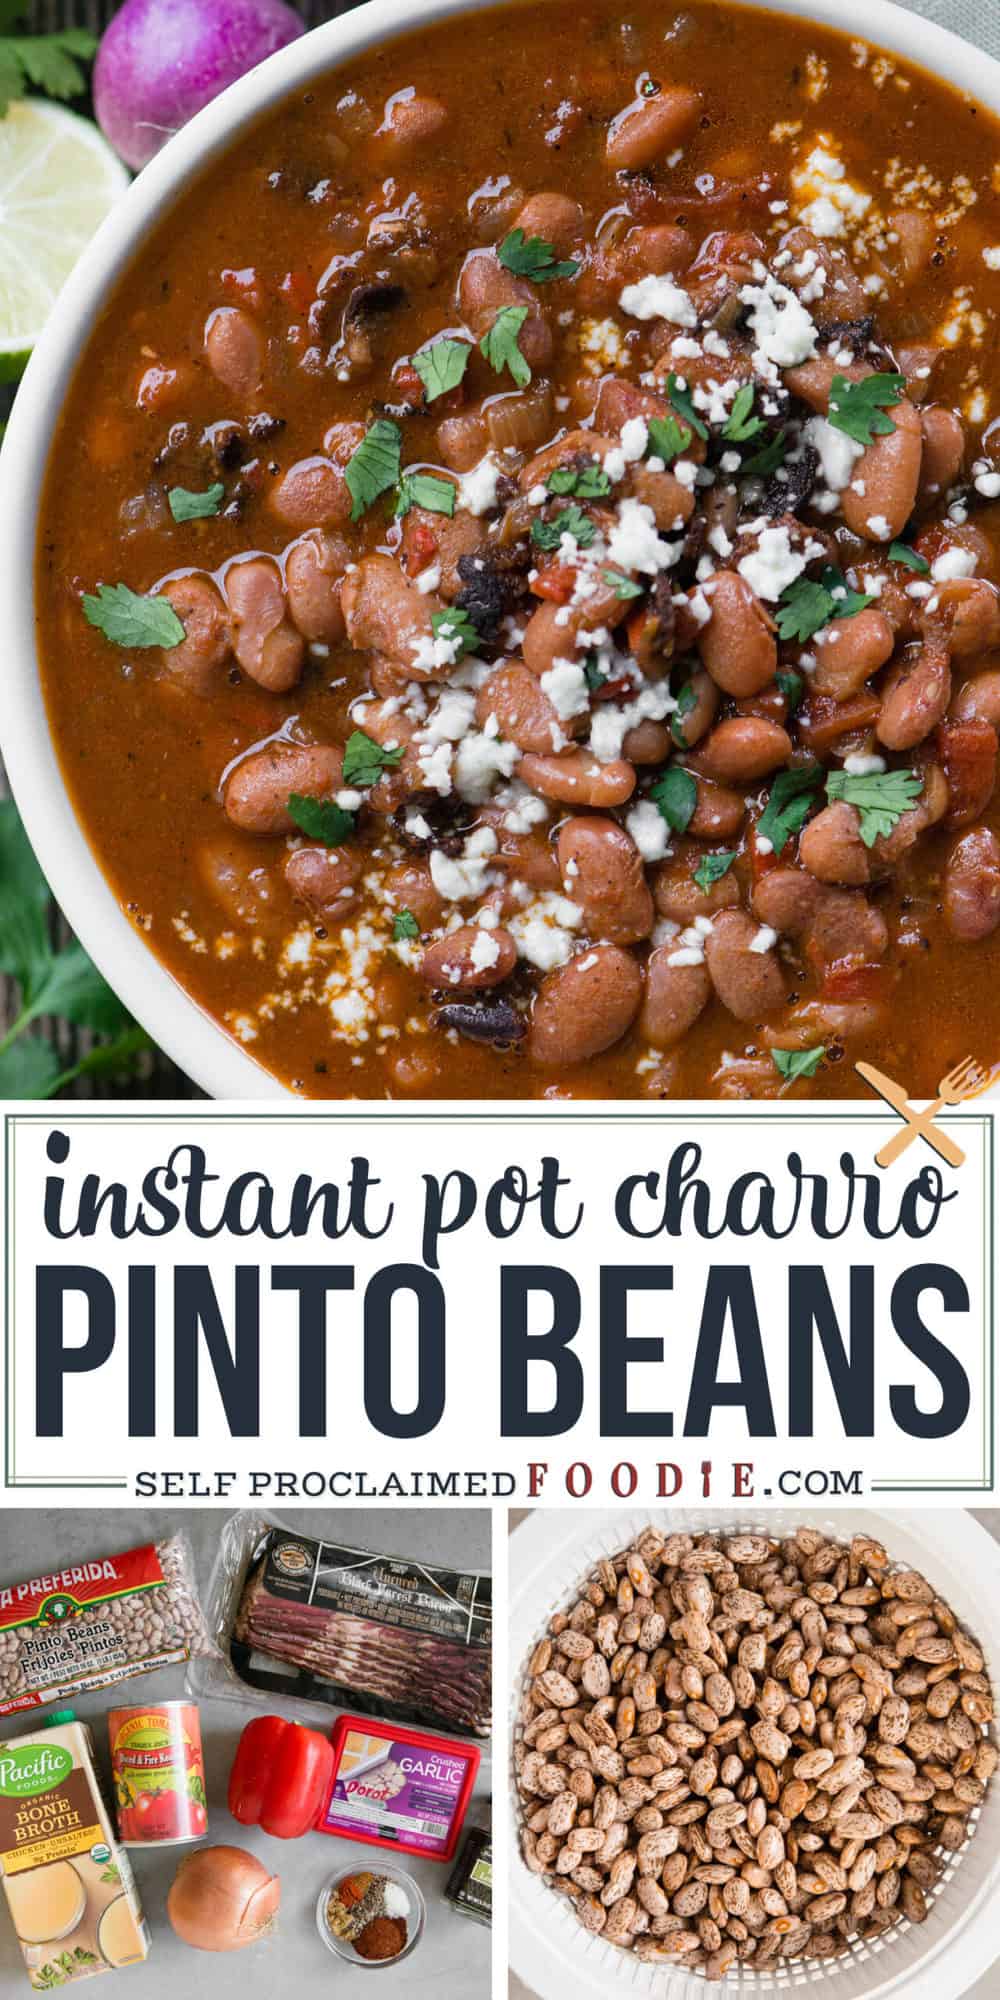 Instant Pot Charro Pinto Beans - Self Proclaimed Foodie